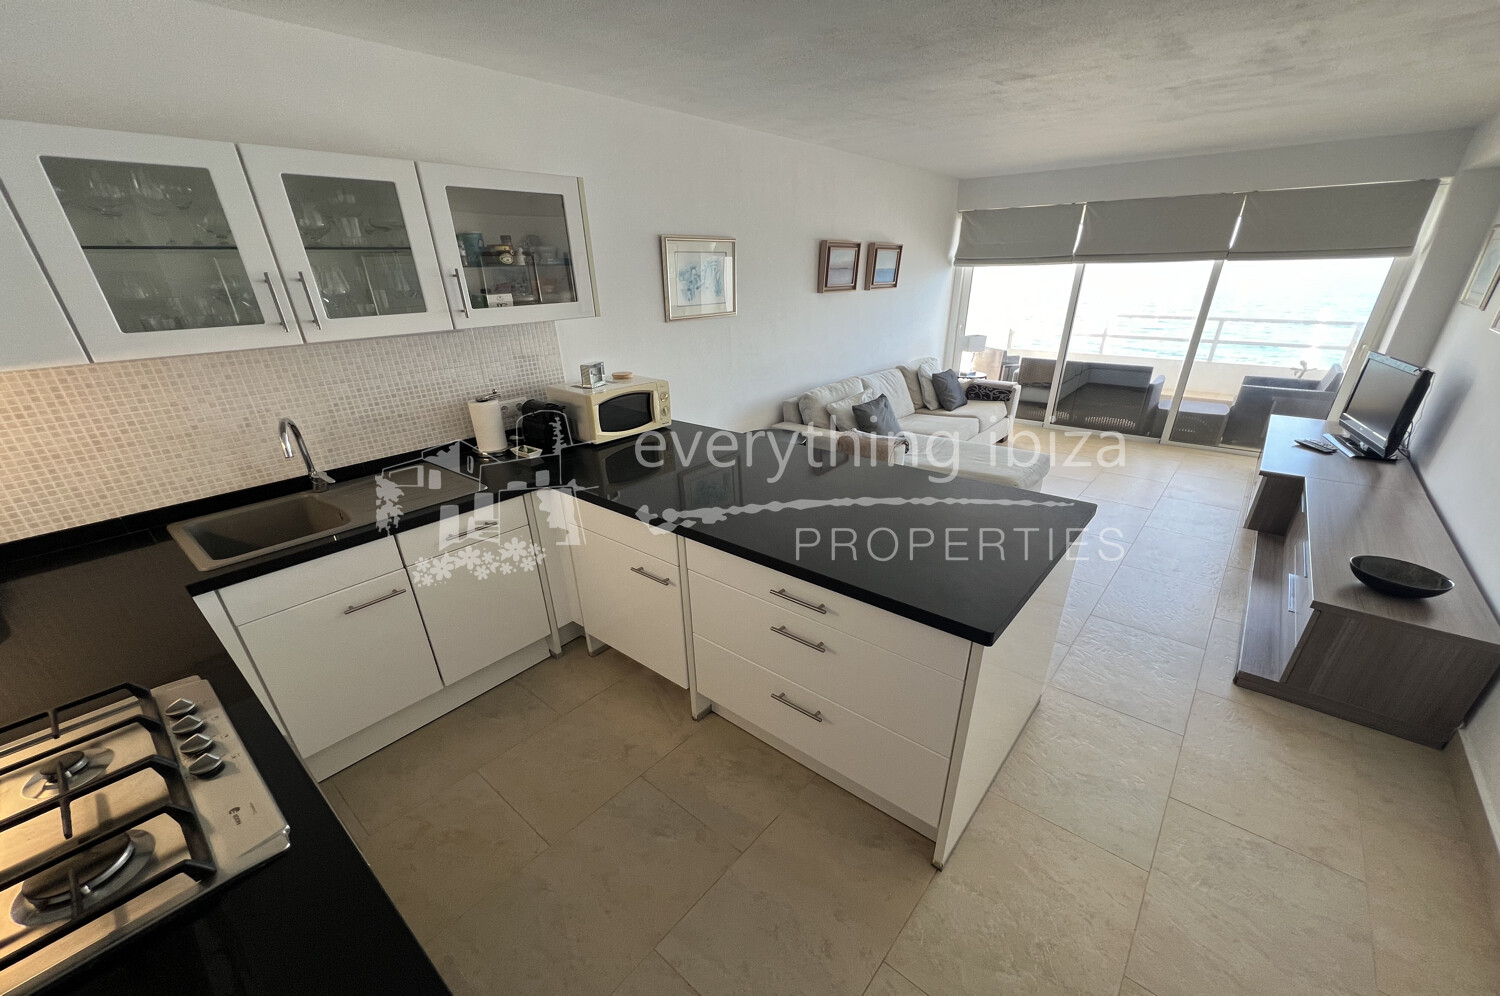 Coastline 2 Bed Apartment with Stunning Views in a Legendary Ibiza Location, ref. 1706, for sale in Ibiza by everything ibiza Properties